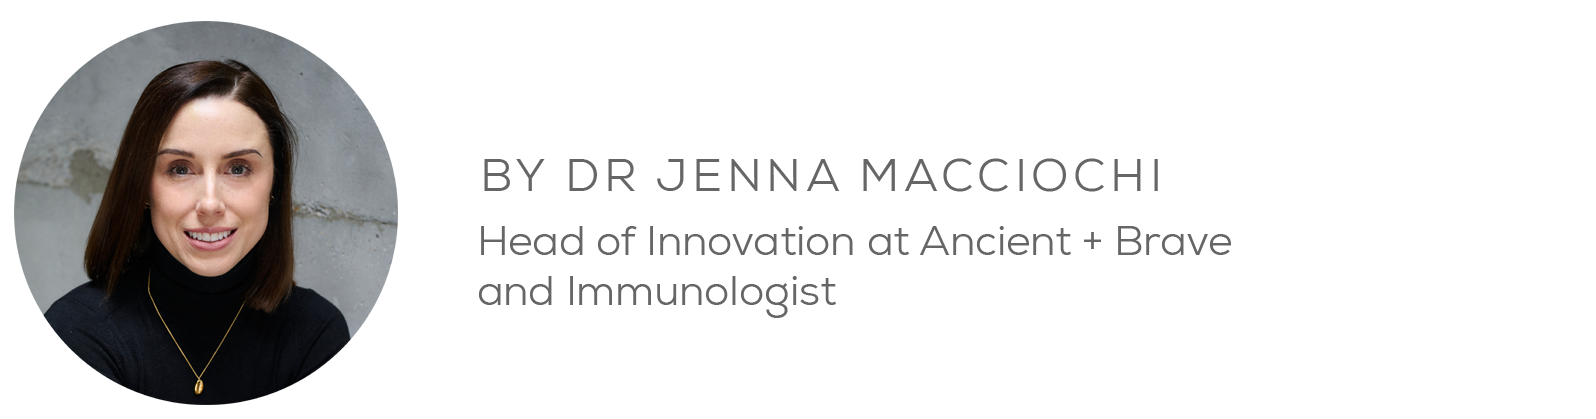 BY DR JENNA MACCIOCHI - Head of Innovation at Ancient + Brave and Immunologist